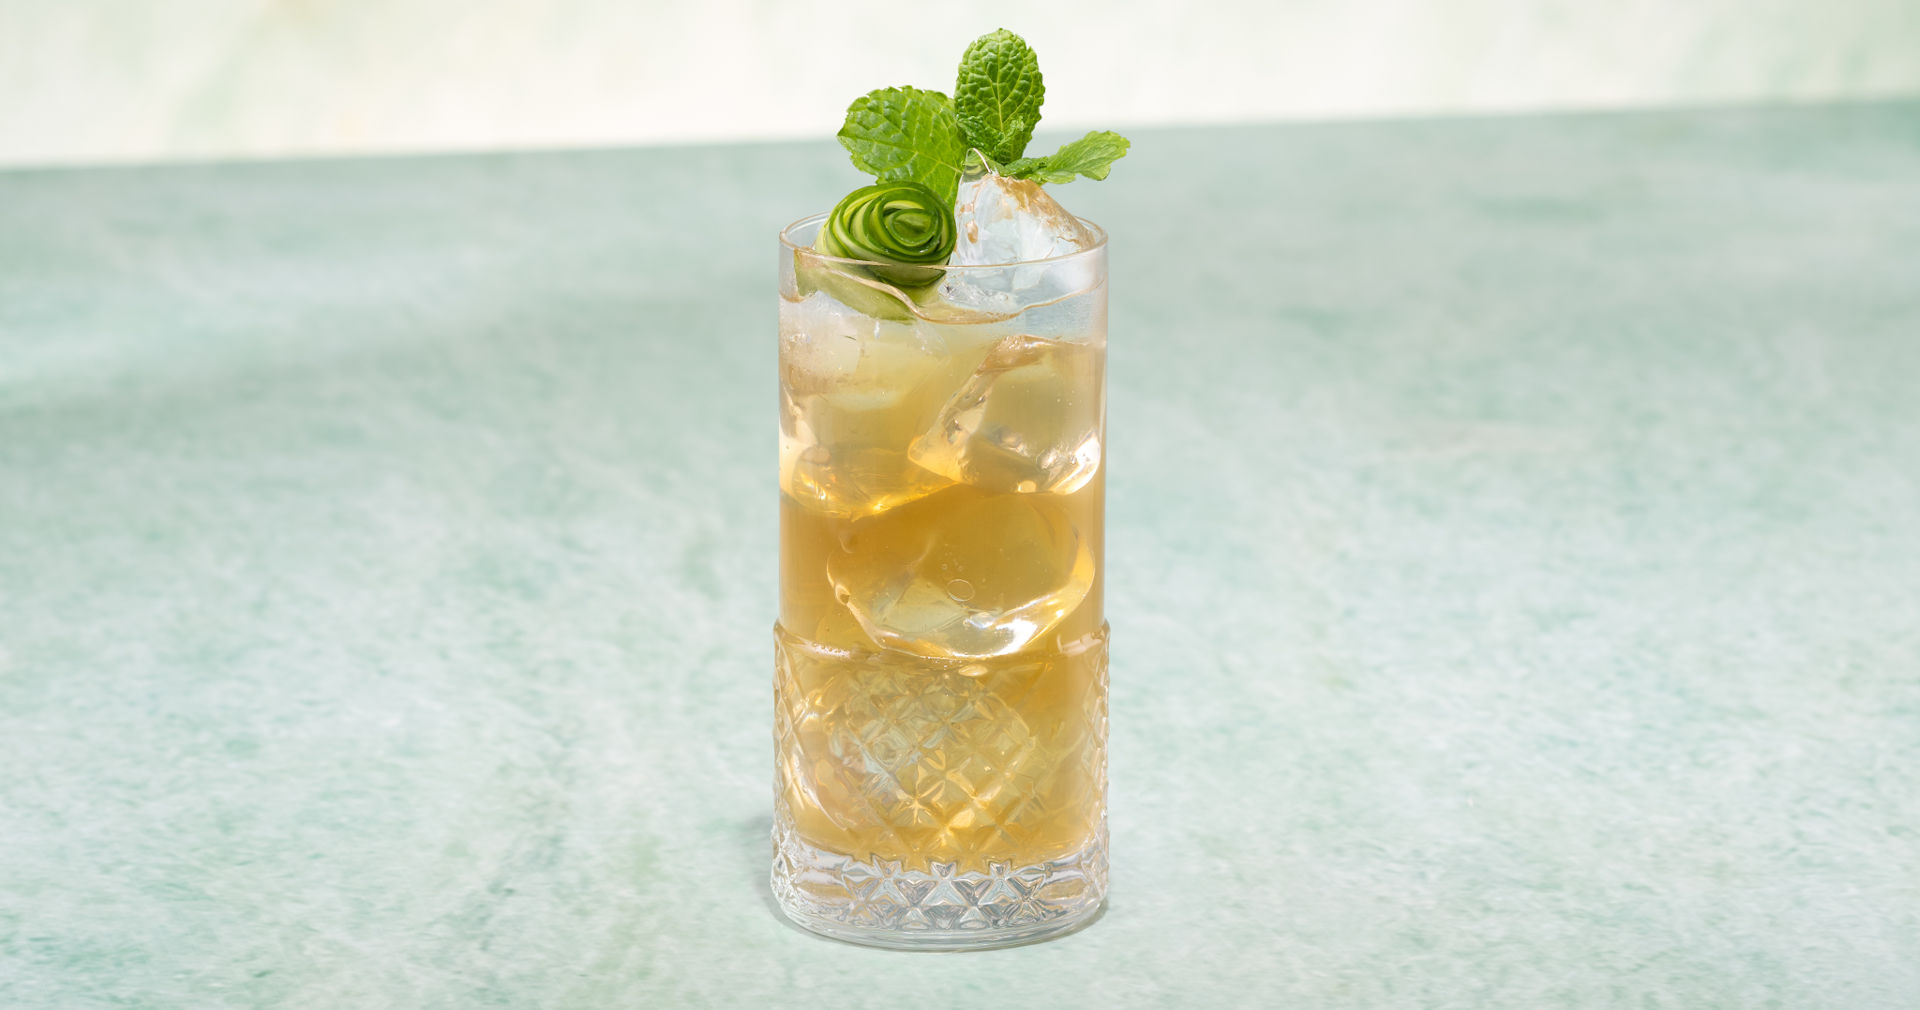 Glass of Emerald Green Iced Tea on a green stone surface